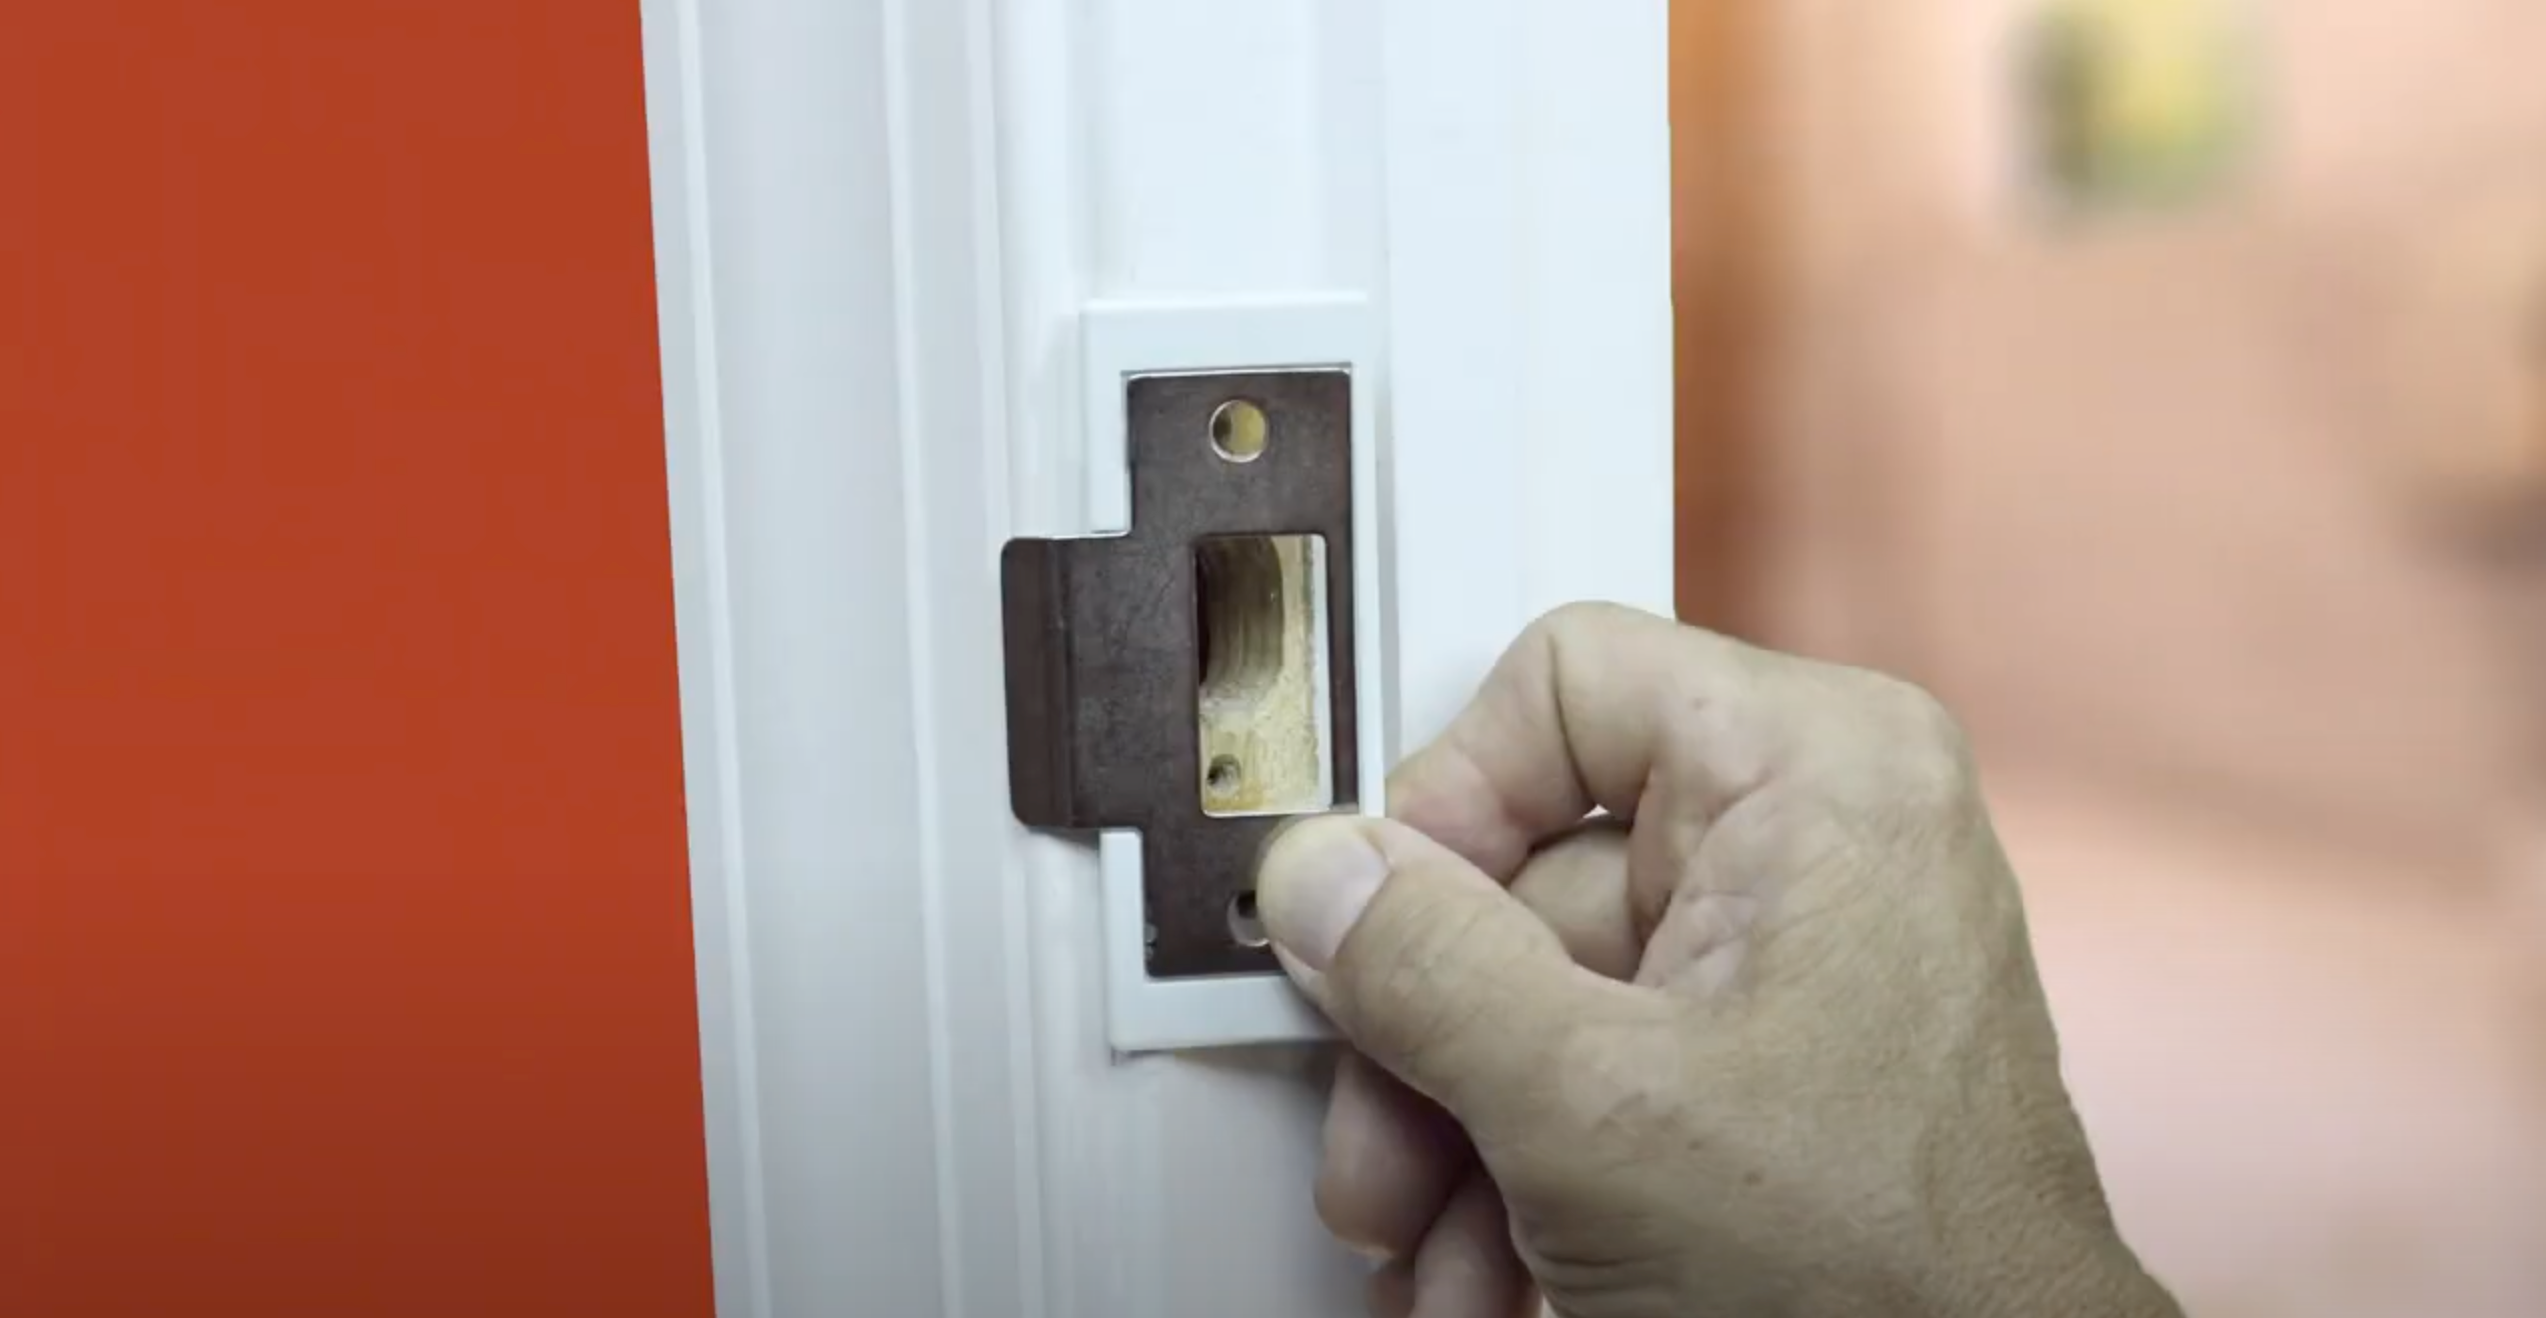 Load video: SHOWING HOW FIX-A-LATCH WORKS.